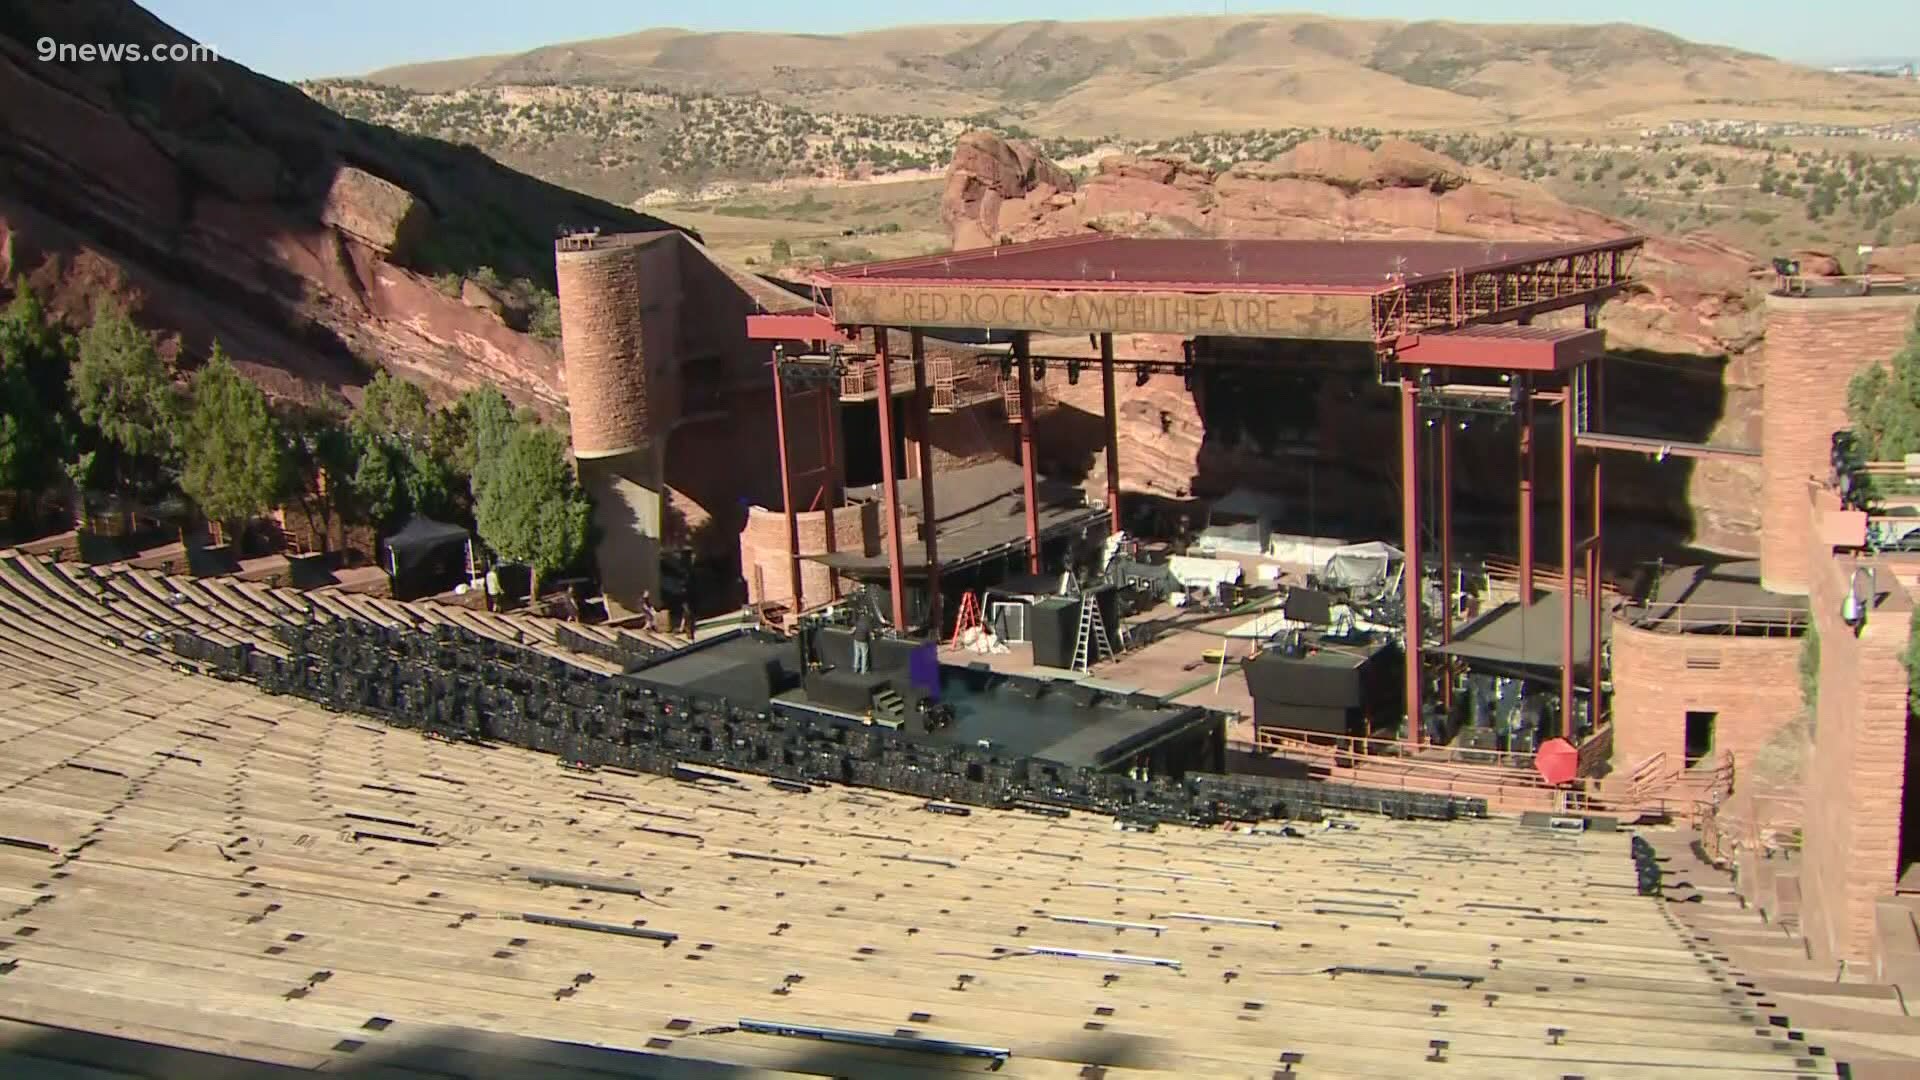 Red Rocks Amphitheatre will begin hosting concerts at reduced capacity starting Thursday.